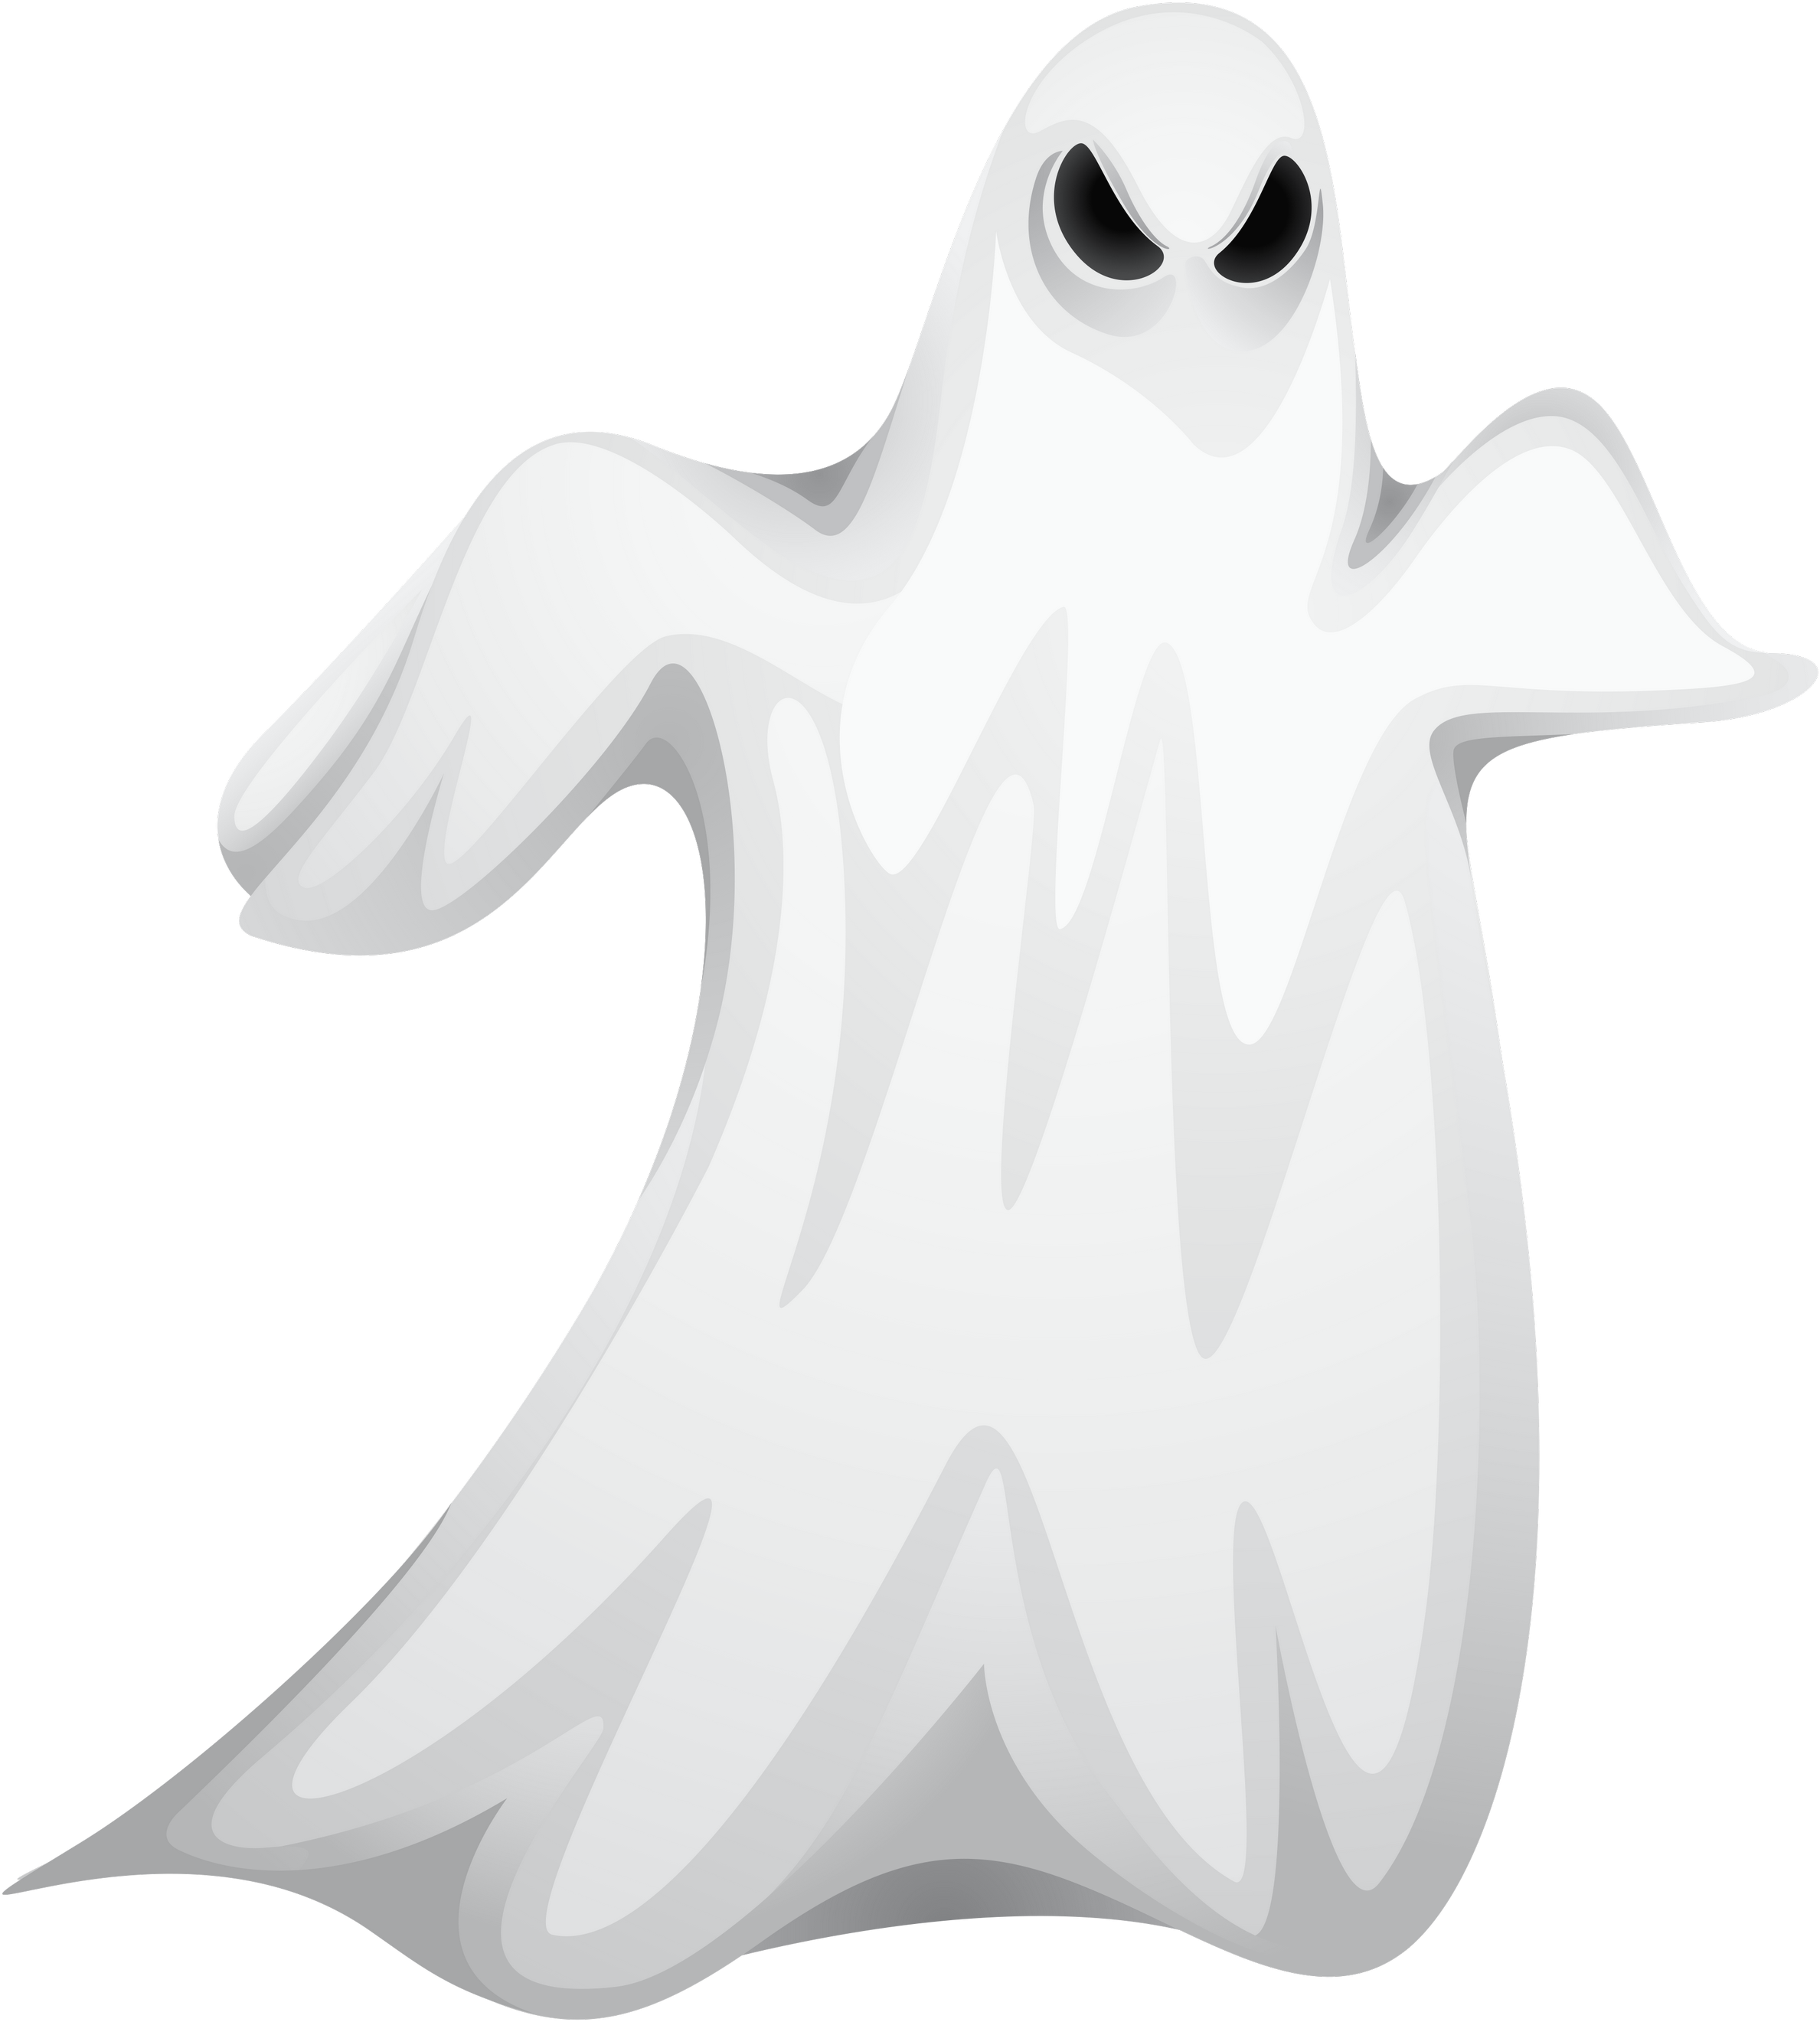 A White Ghost With Black Eyes